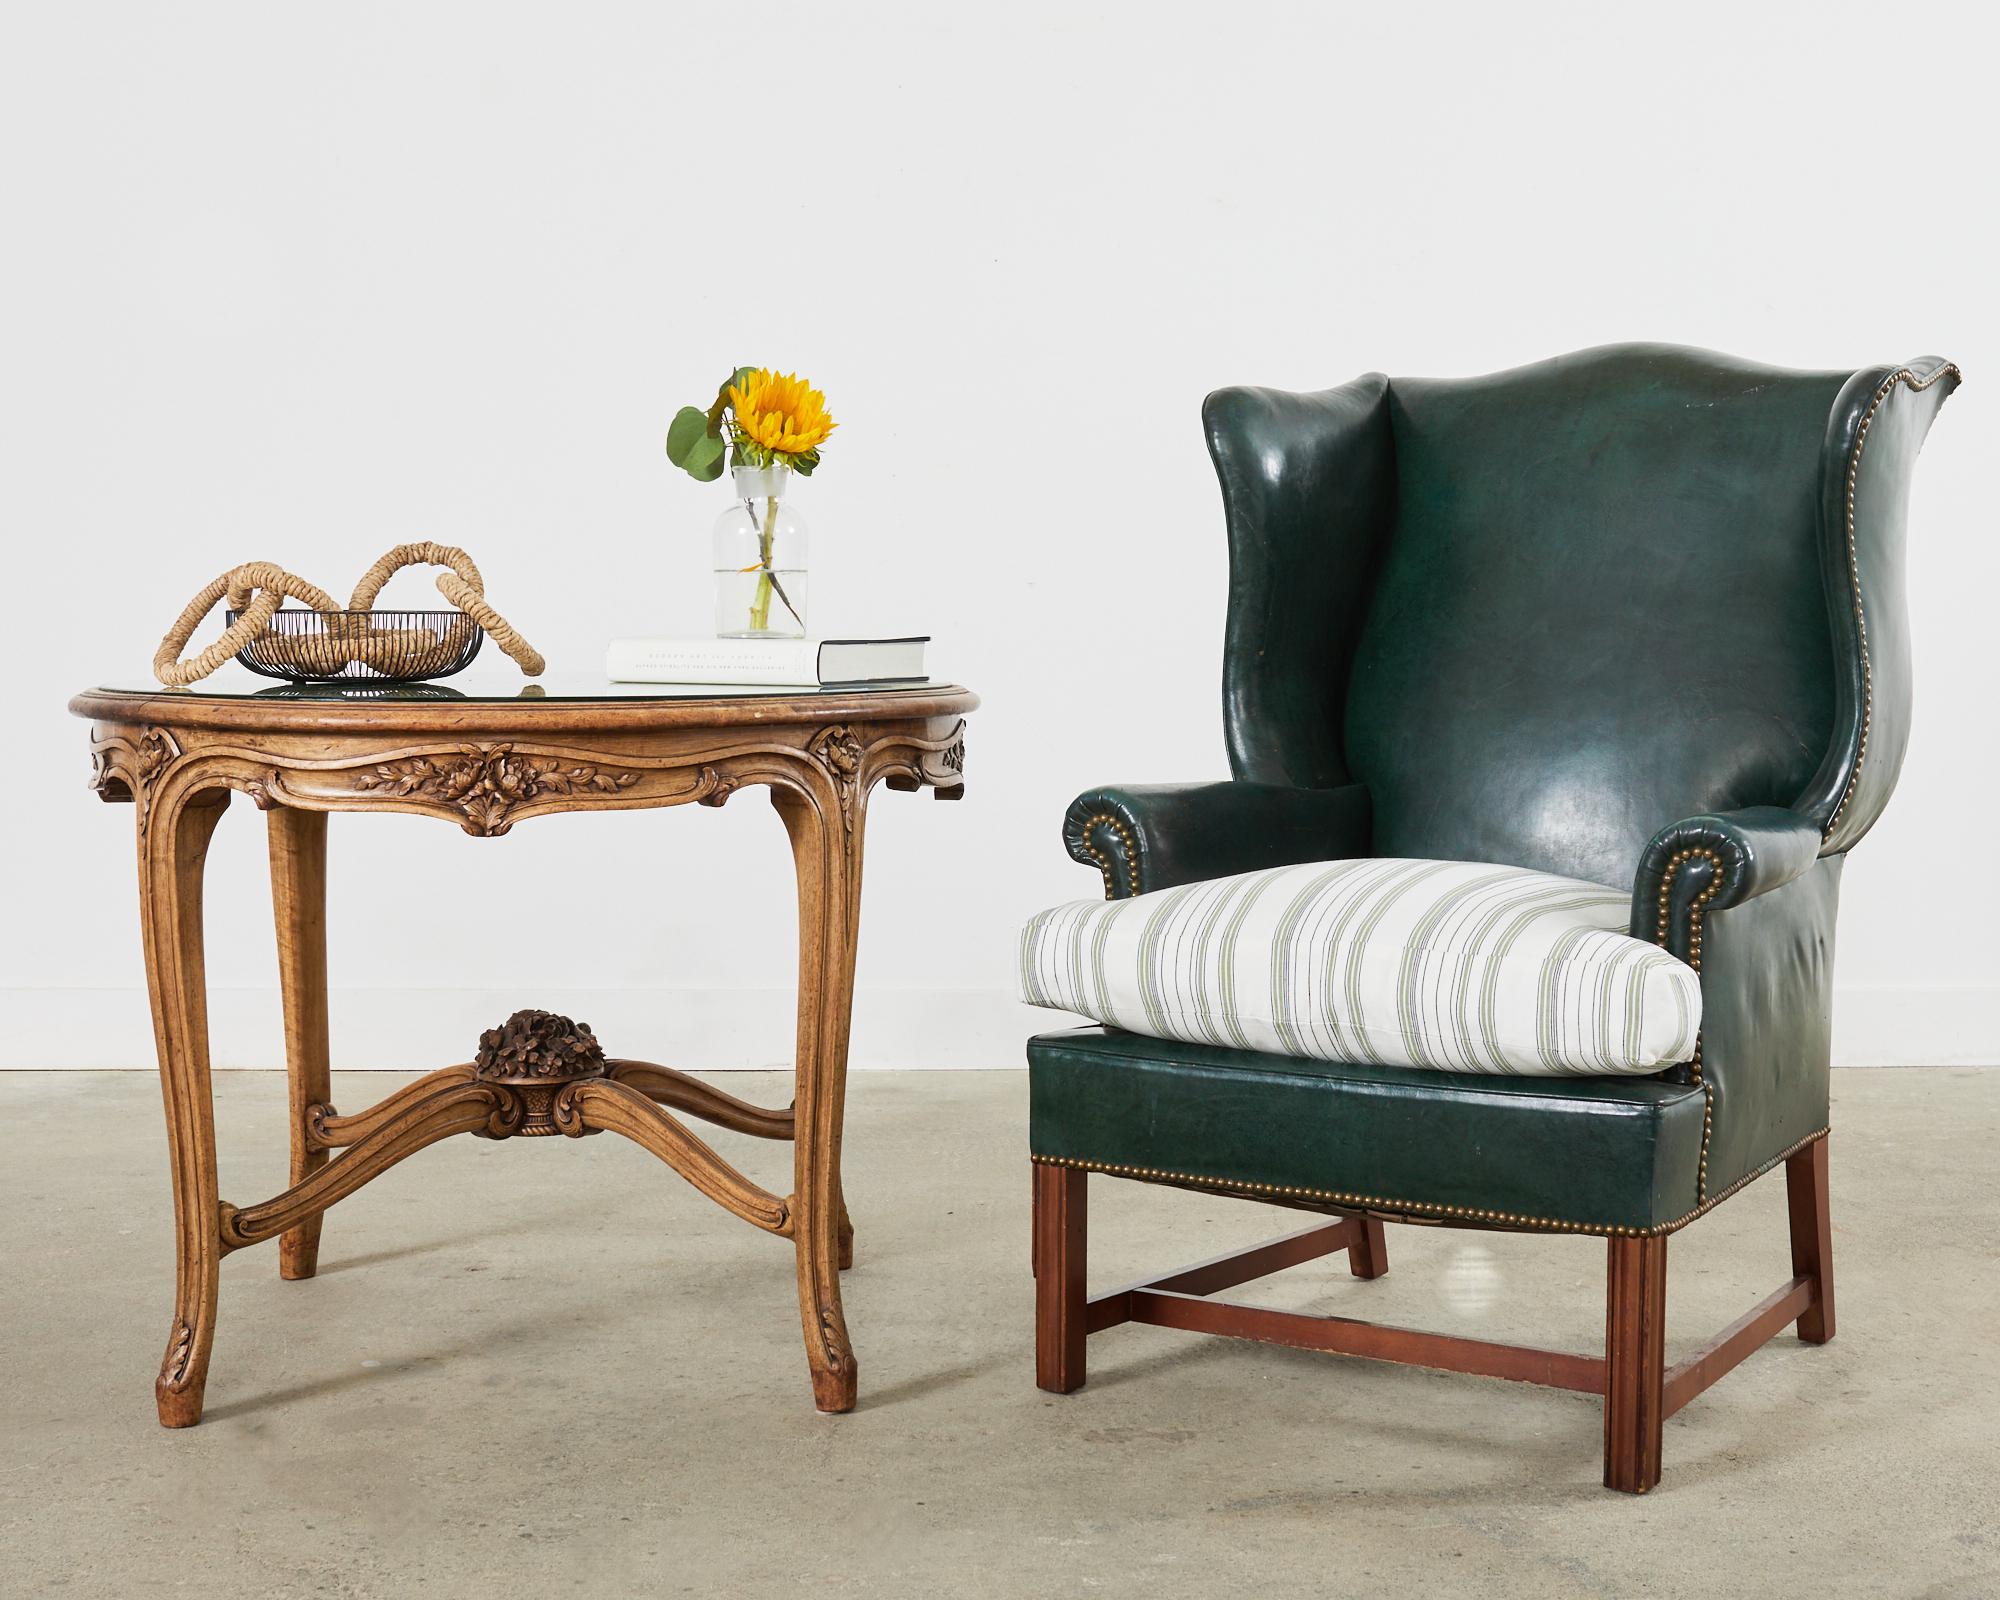 English Georgian style mahogany framed wingback chair featuring a regal hunter green leather upholstery. The large armchair features a hardwood mahogany frame with gracefully curved, fully developed wings. The frame has a classic hourglass shaped